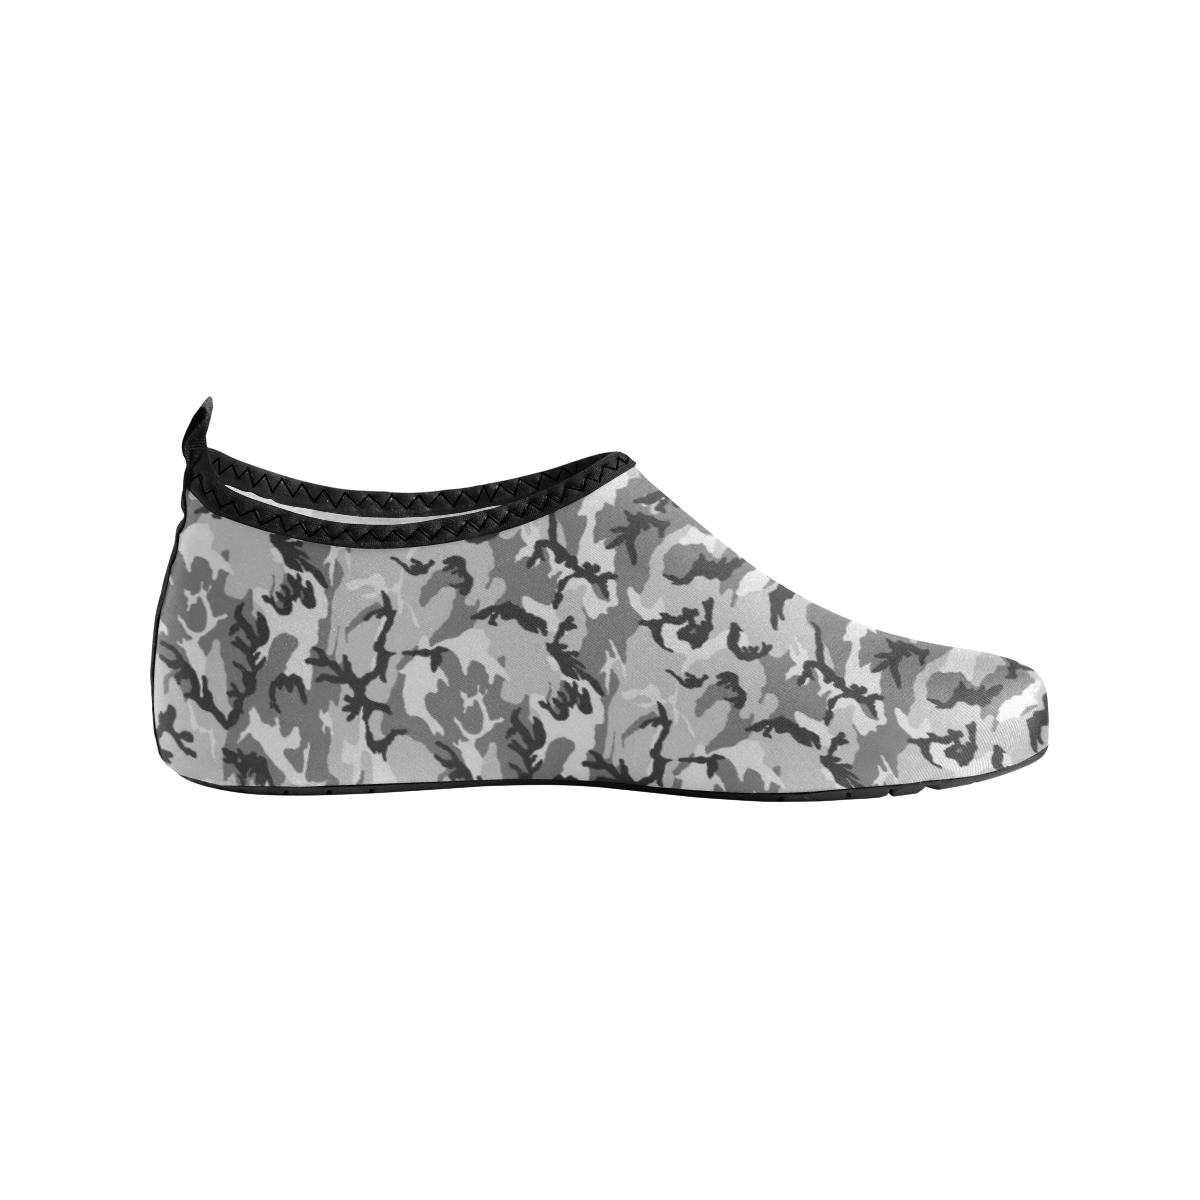 Woodland Urban City Black/Gray Camouflage Women's Slip-On Water Shoes (Model 056)